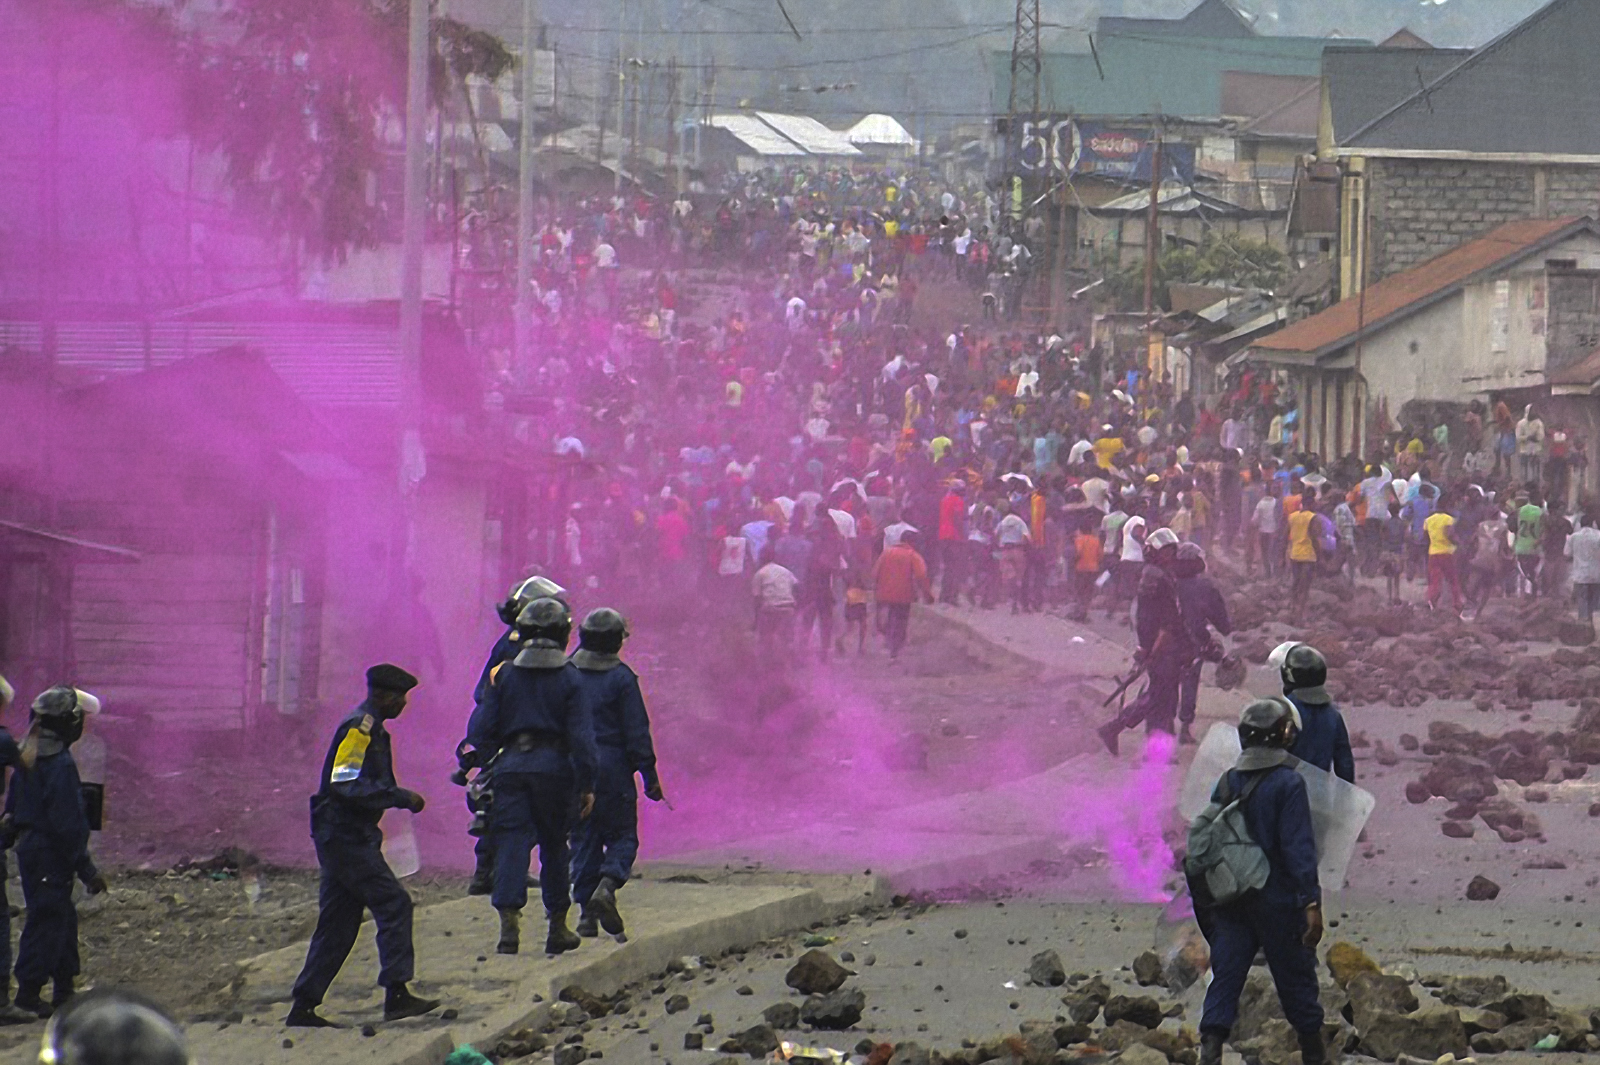 Flares are launched by Democratic Republic of Congo police forces during a demonstration in Goma, the country's capital, on Sept. 19, 2016 (Mustafa Mulopwe—AFP/Getty Images)